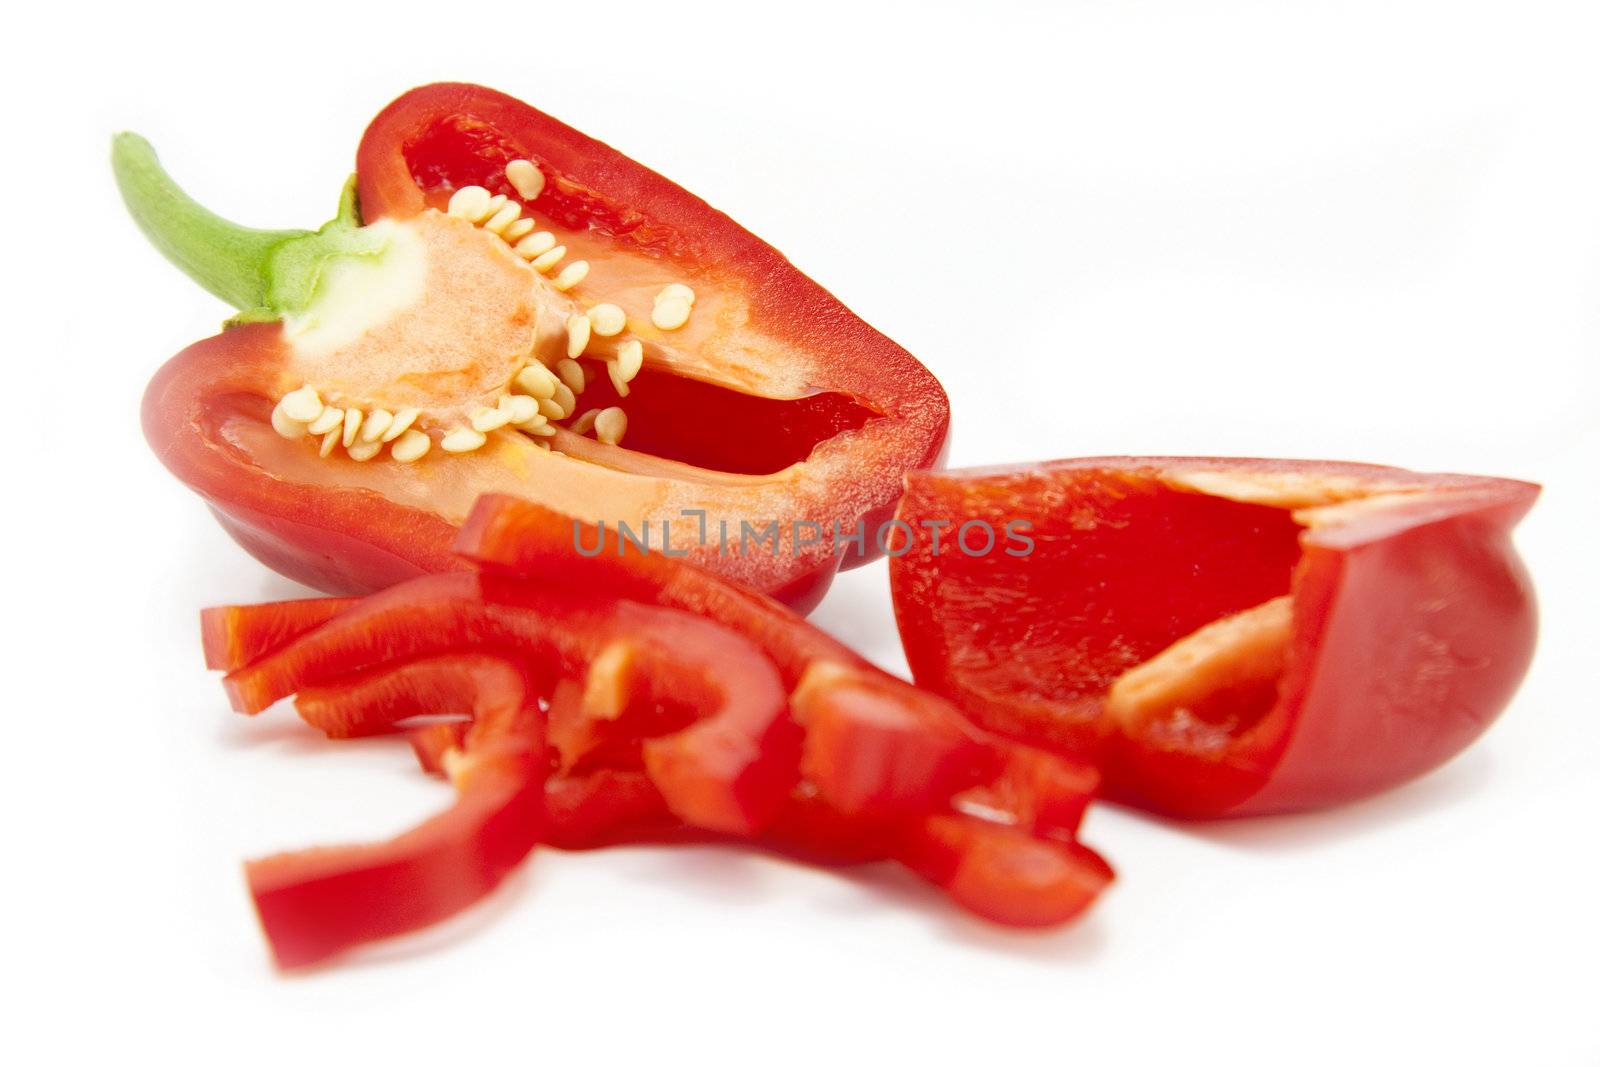 Sliced red pepper (bg) by ChrisAlleaume